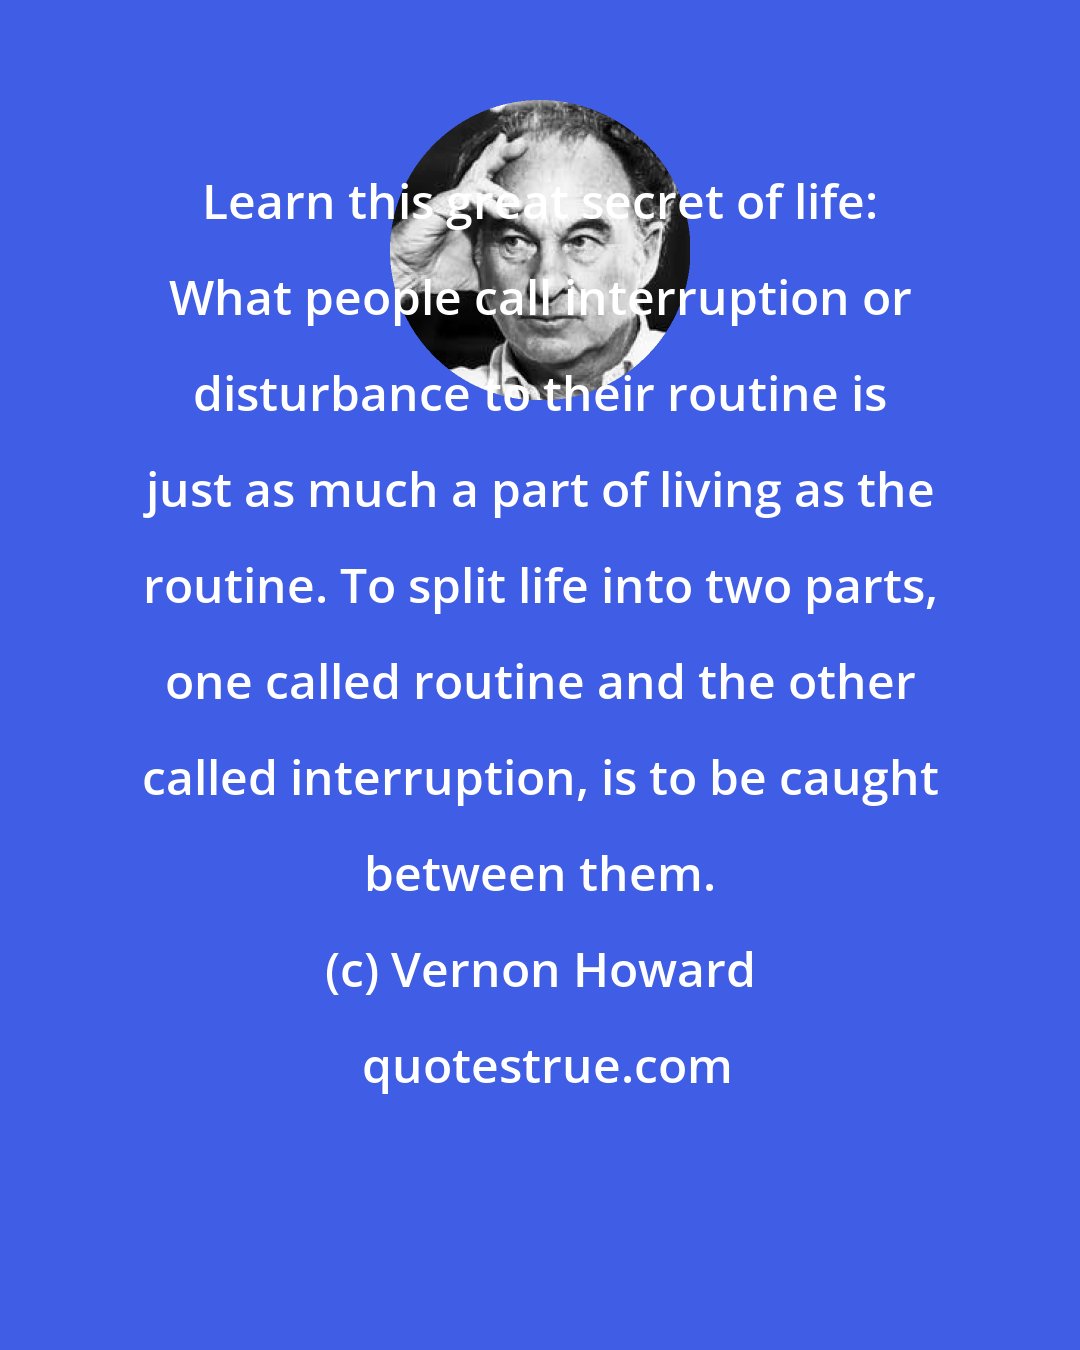 Vernon Howard: Learn this great secret of life: What people call interruption or disturbance to their routine is just as much a part of living as the routine. To split life into two parts, one called routine and the other called interruption, is to be caught between them.